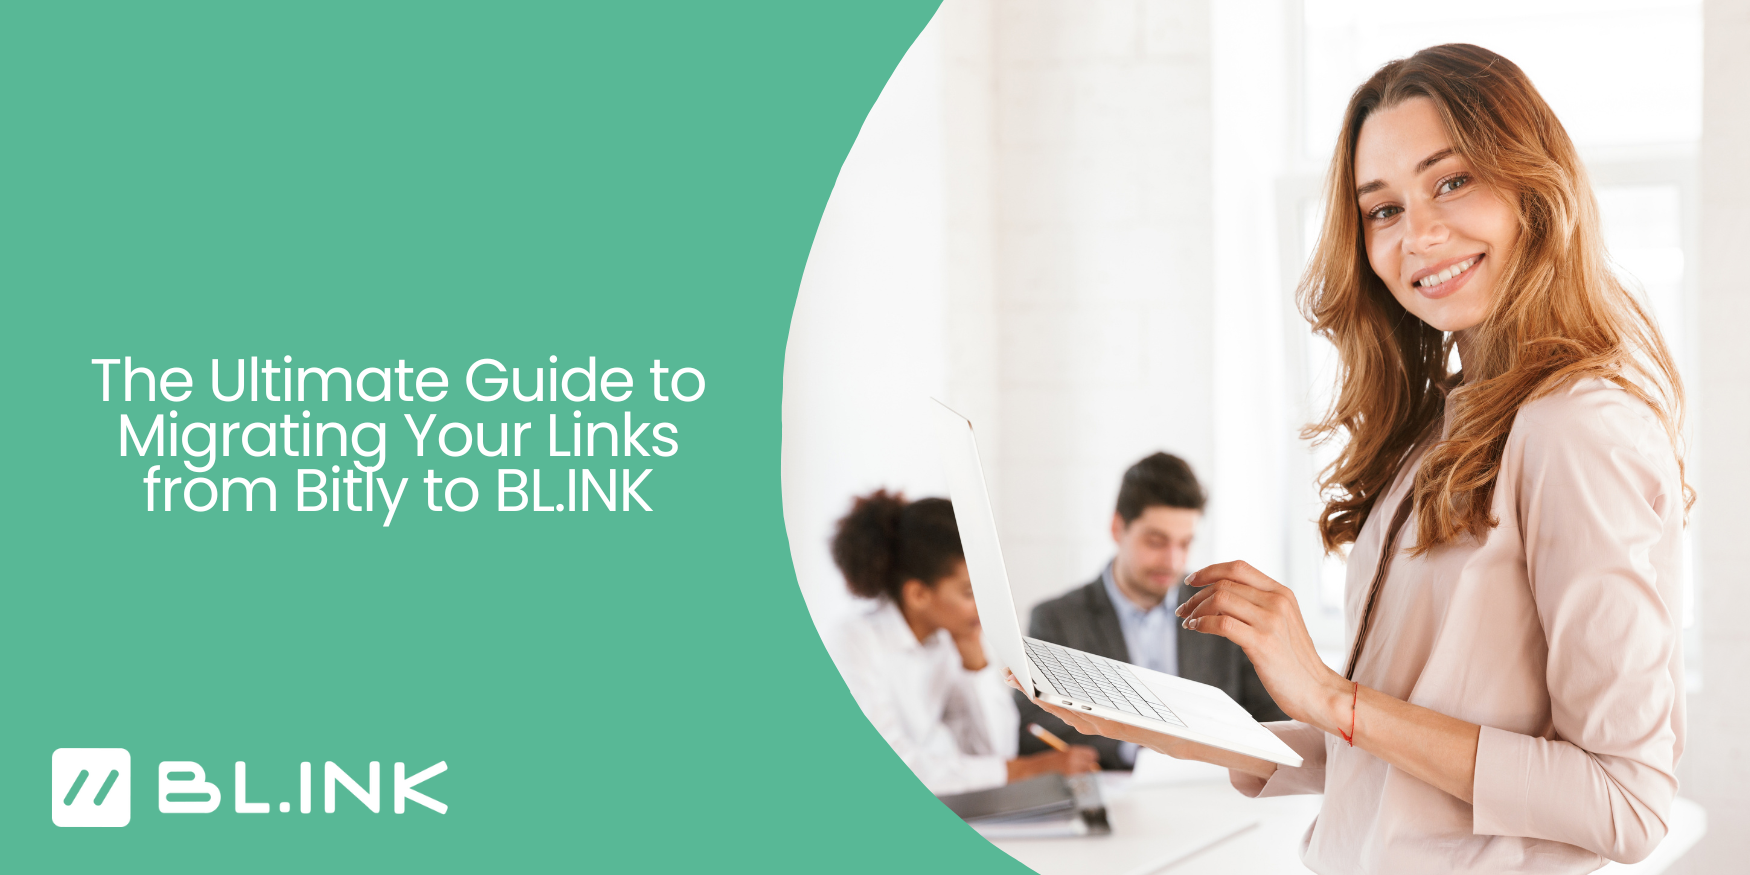 The Ultimate Guide to Migrating Your Links from Bitly to BL.INK